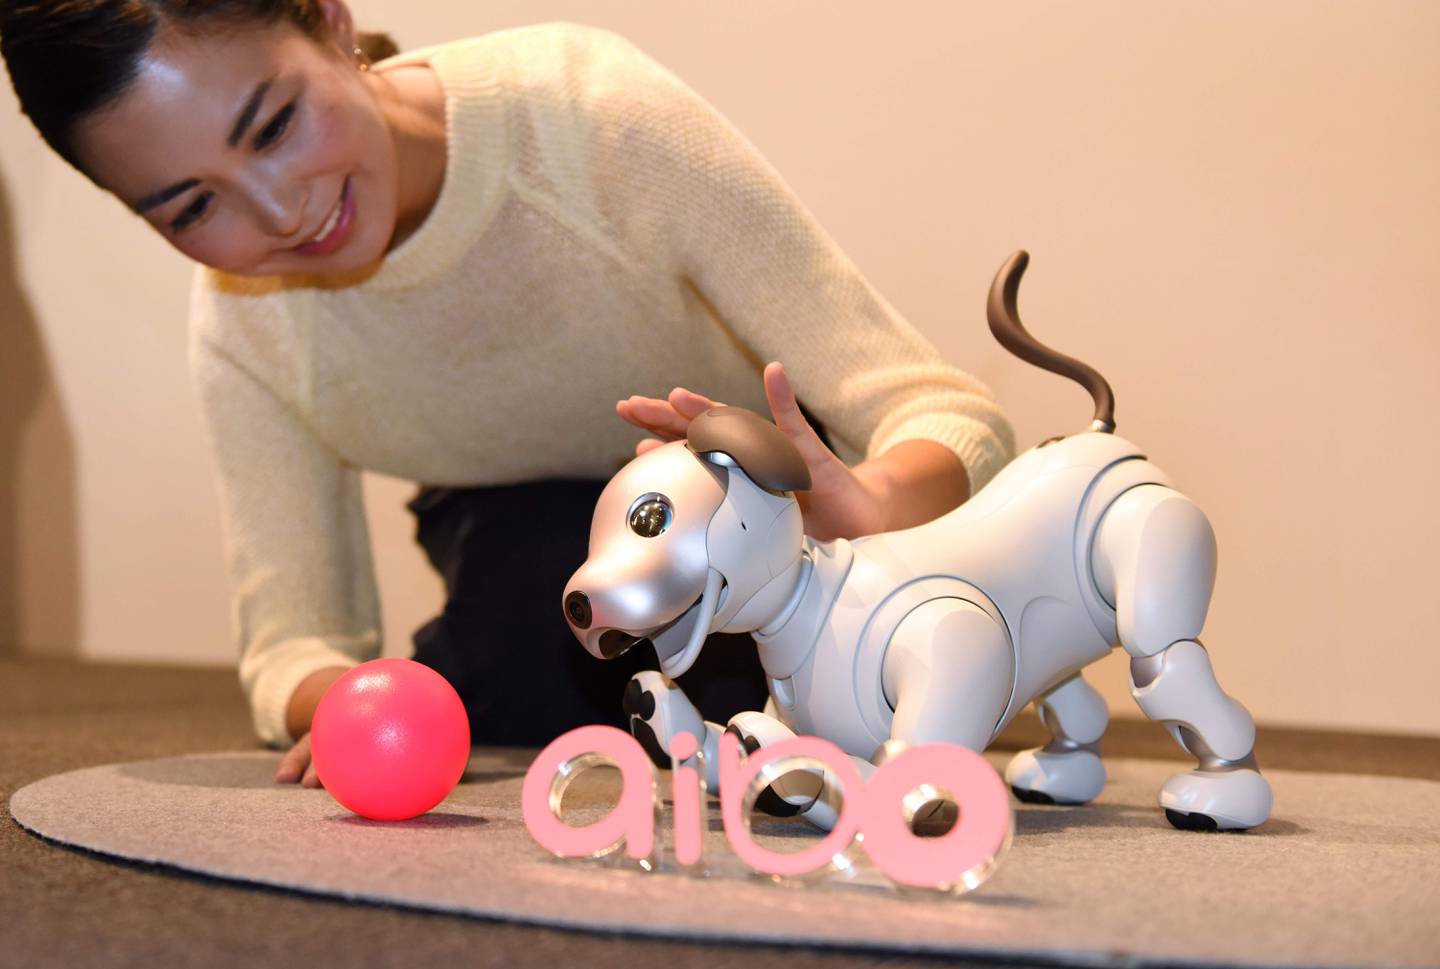 Sony's latest entertainment robot "aibo" is displayed during a press preview at the company's headquarters in Tokyo on November 1, 2017.  
Japanese electronics giant Sony is marking the year of the dog by bringing back to life its robot canine -- packed with artificial intelligence and internet capability. / AFP PHOTO / Kazuhiro NOGI